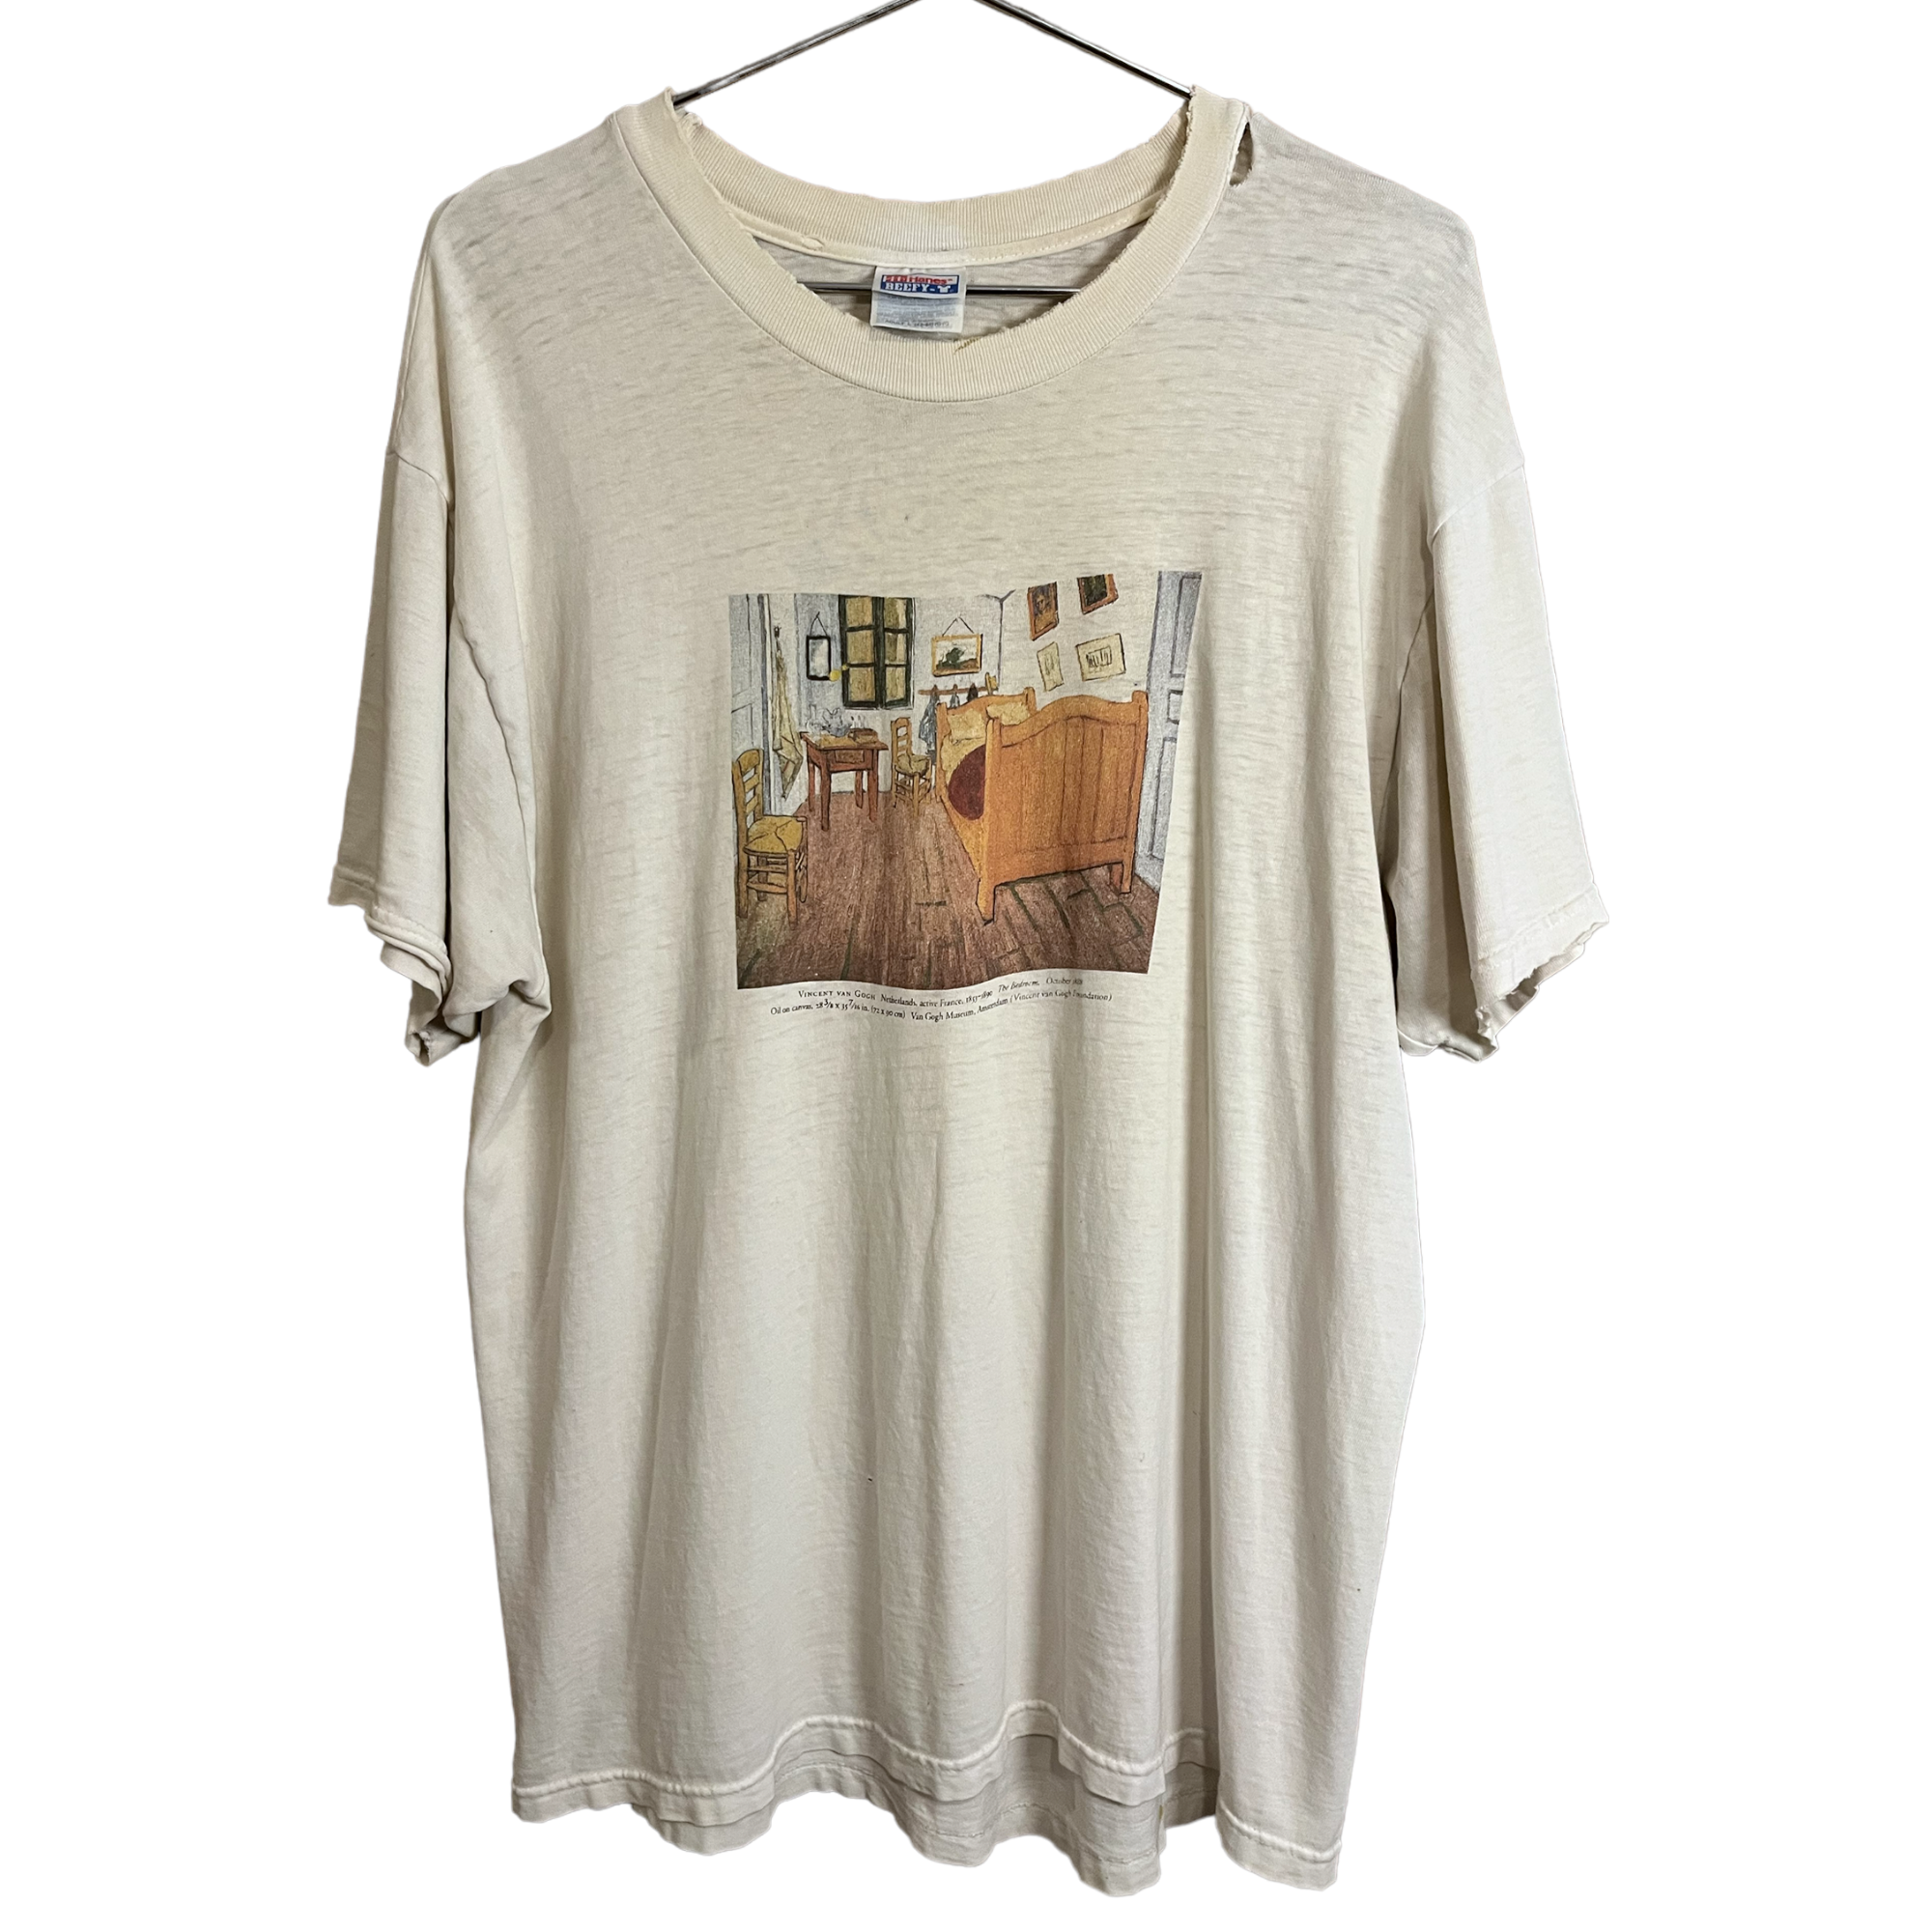 1999 Van Gogh ‘The Bedroom’ Thrashed T-Shirt - Aged White / Dirty White - L/XL